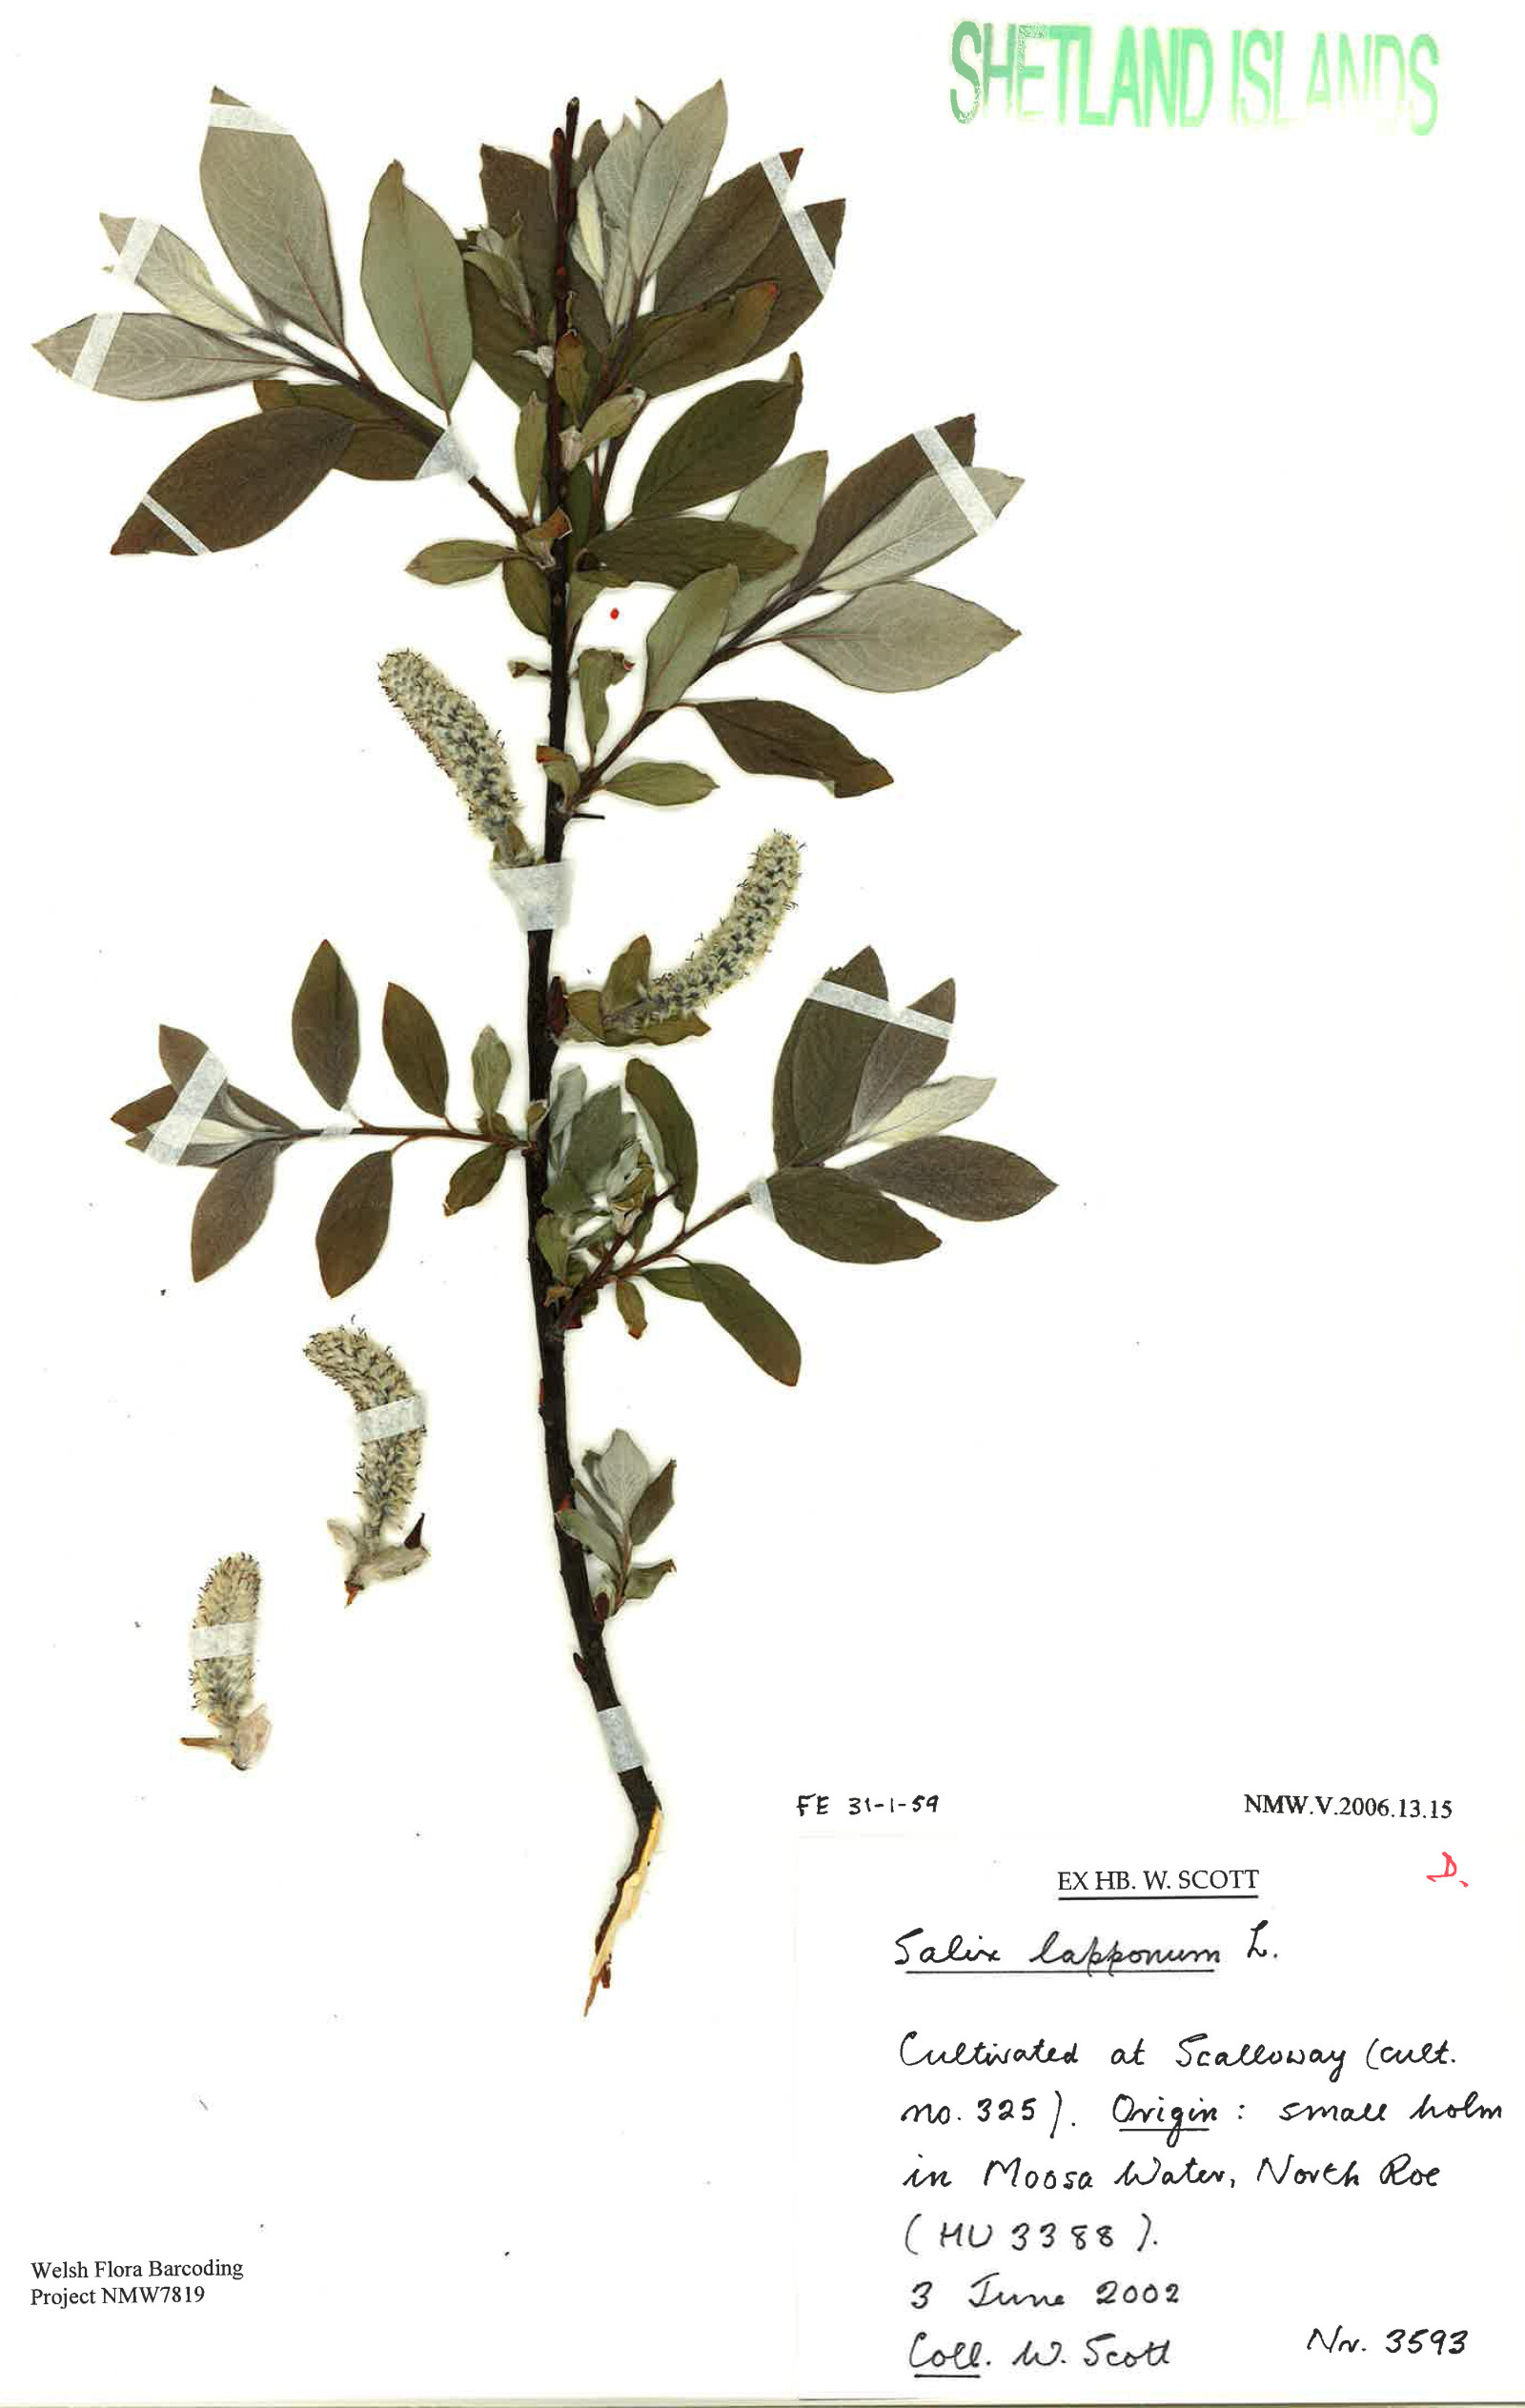 Herbarium specimen showing strips of card attaching the plant to the sheet